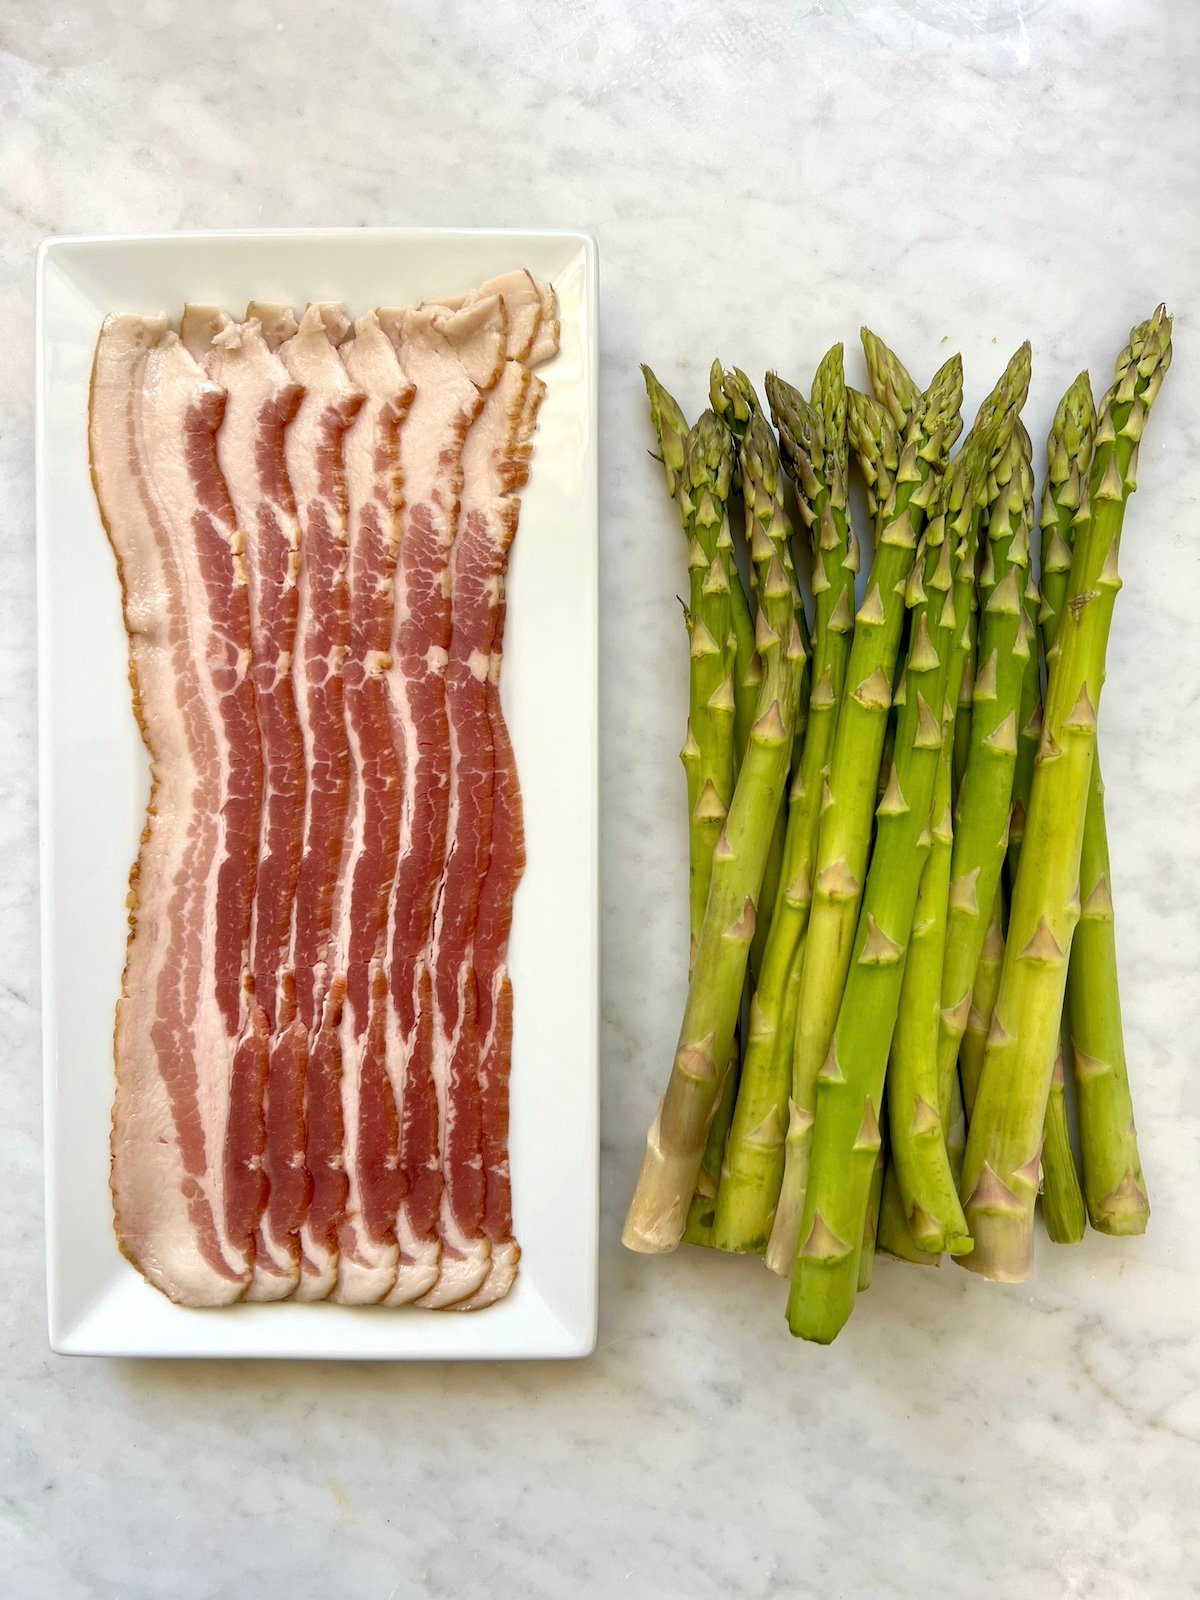 bacon on a plate next to a bundle of asparagus.